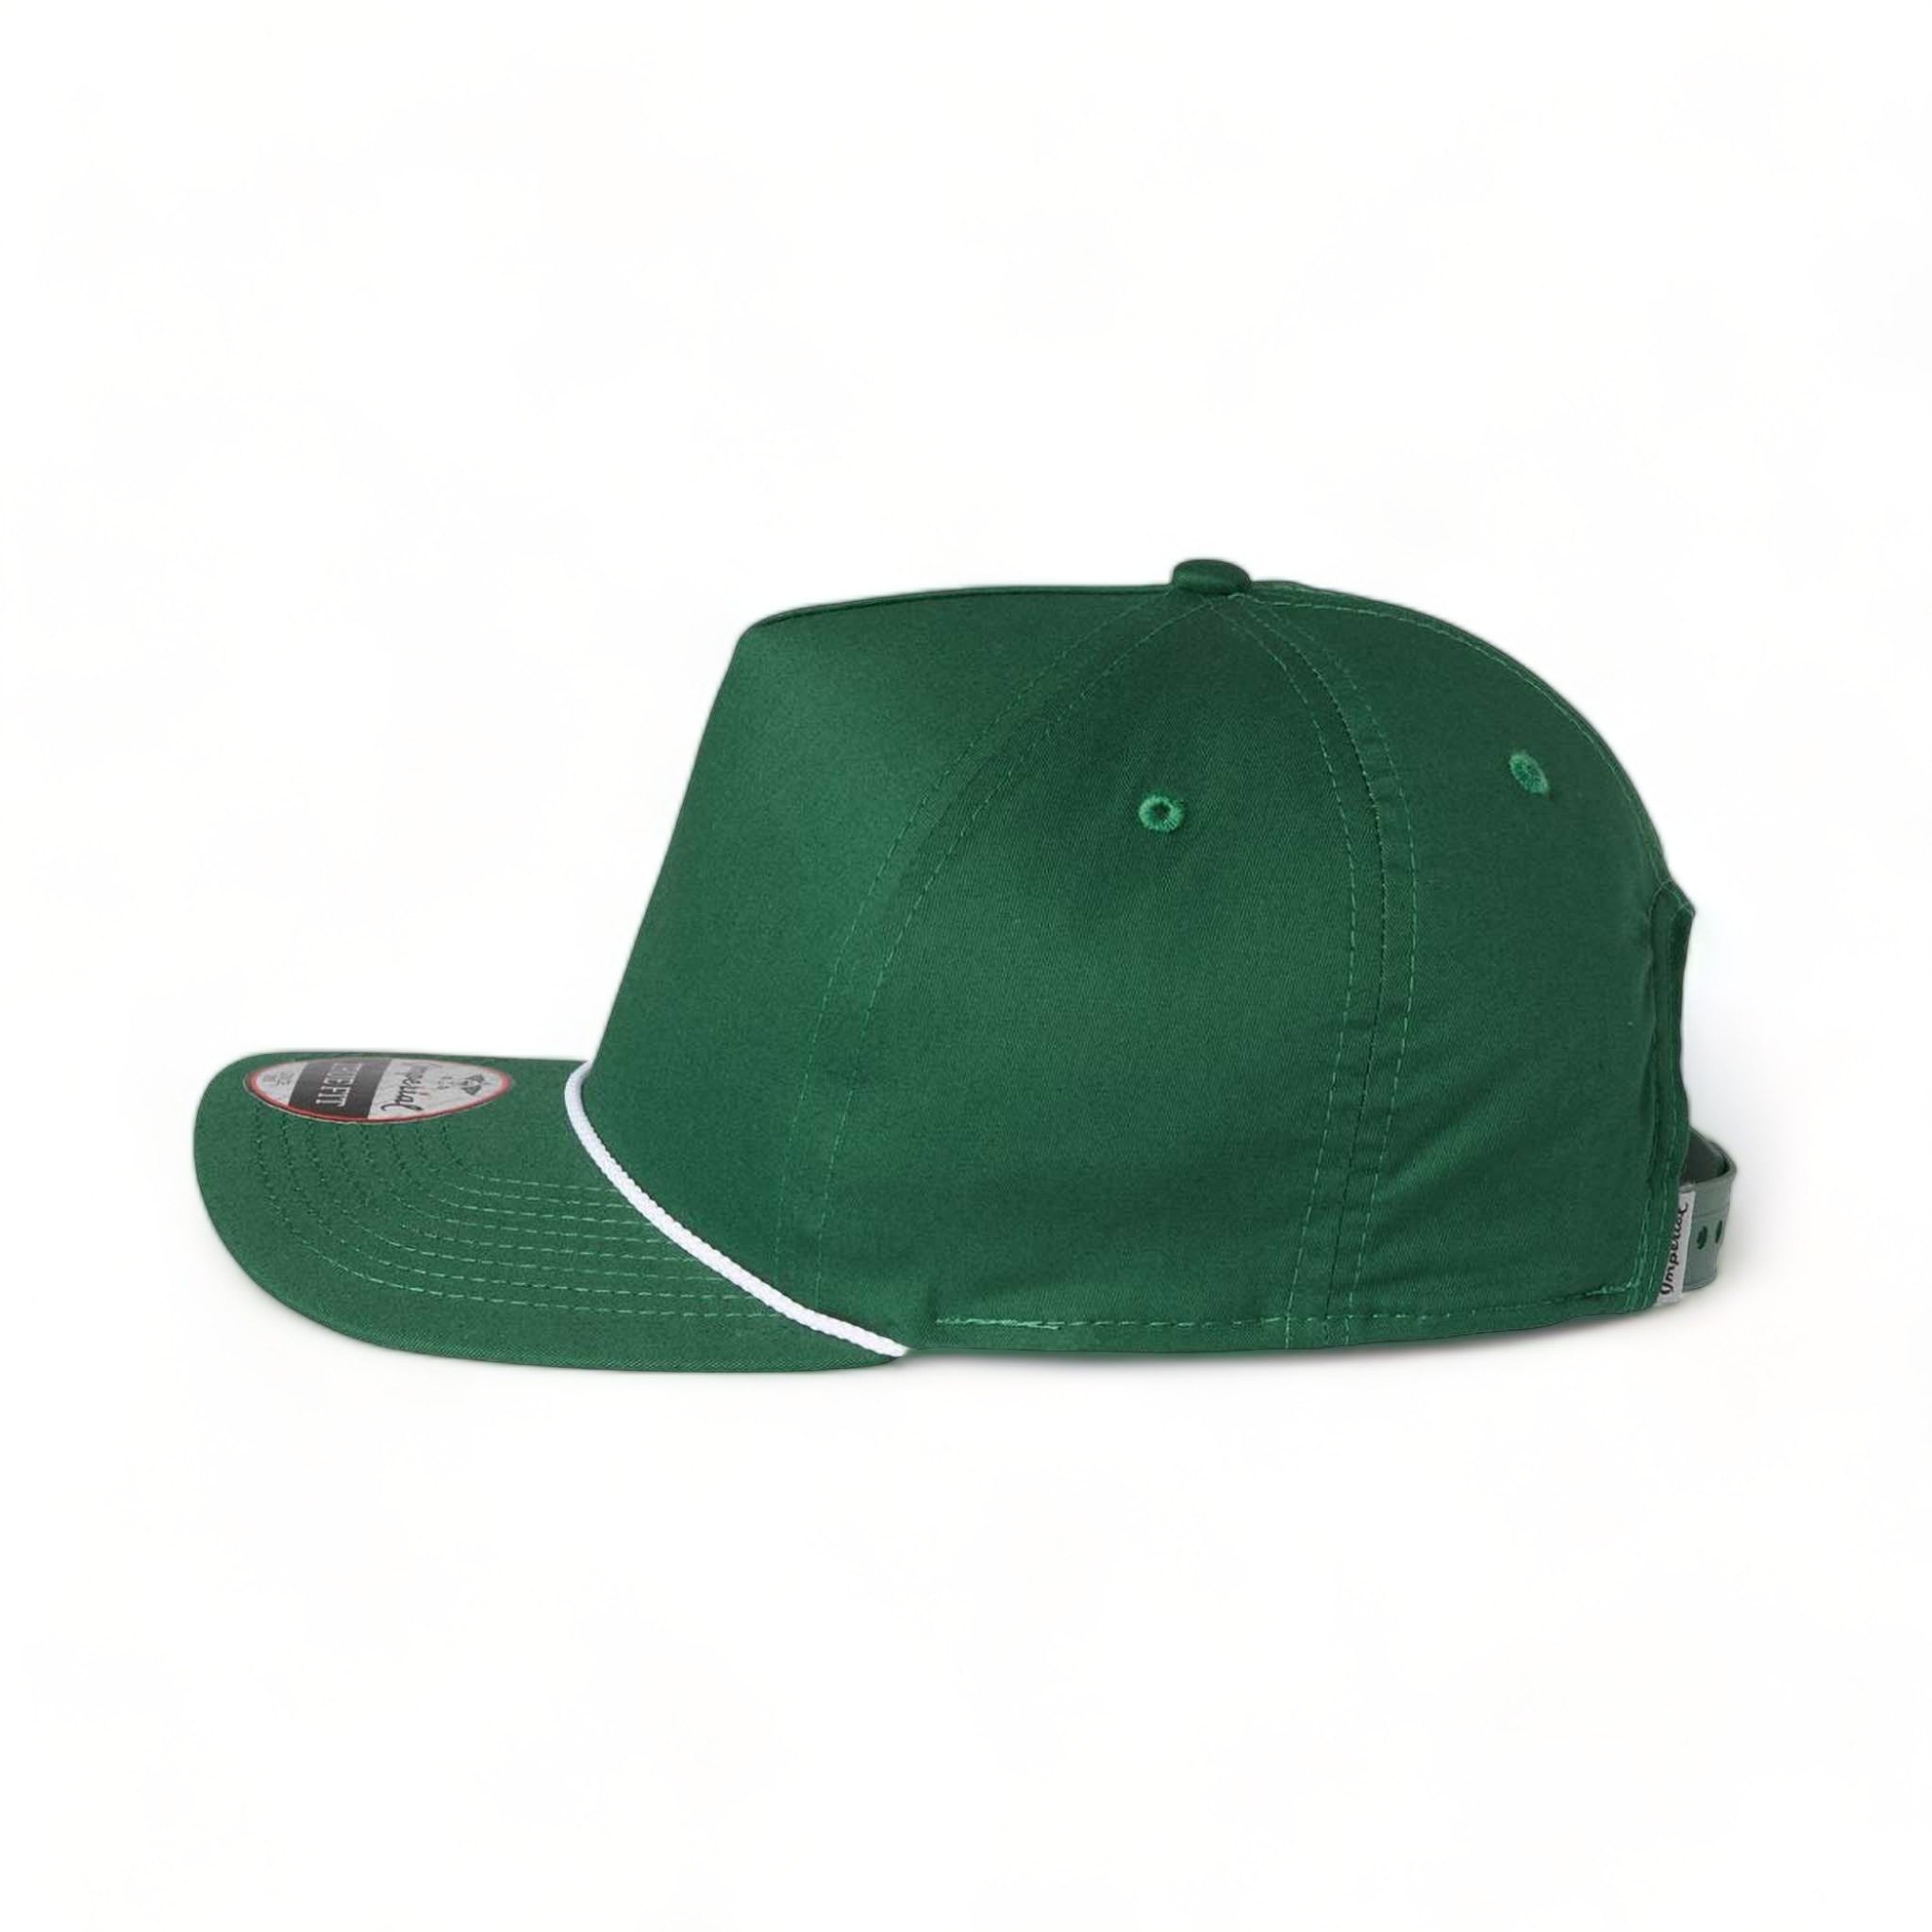 Side view of Imperial 5056 custom hat in forest and white